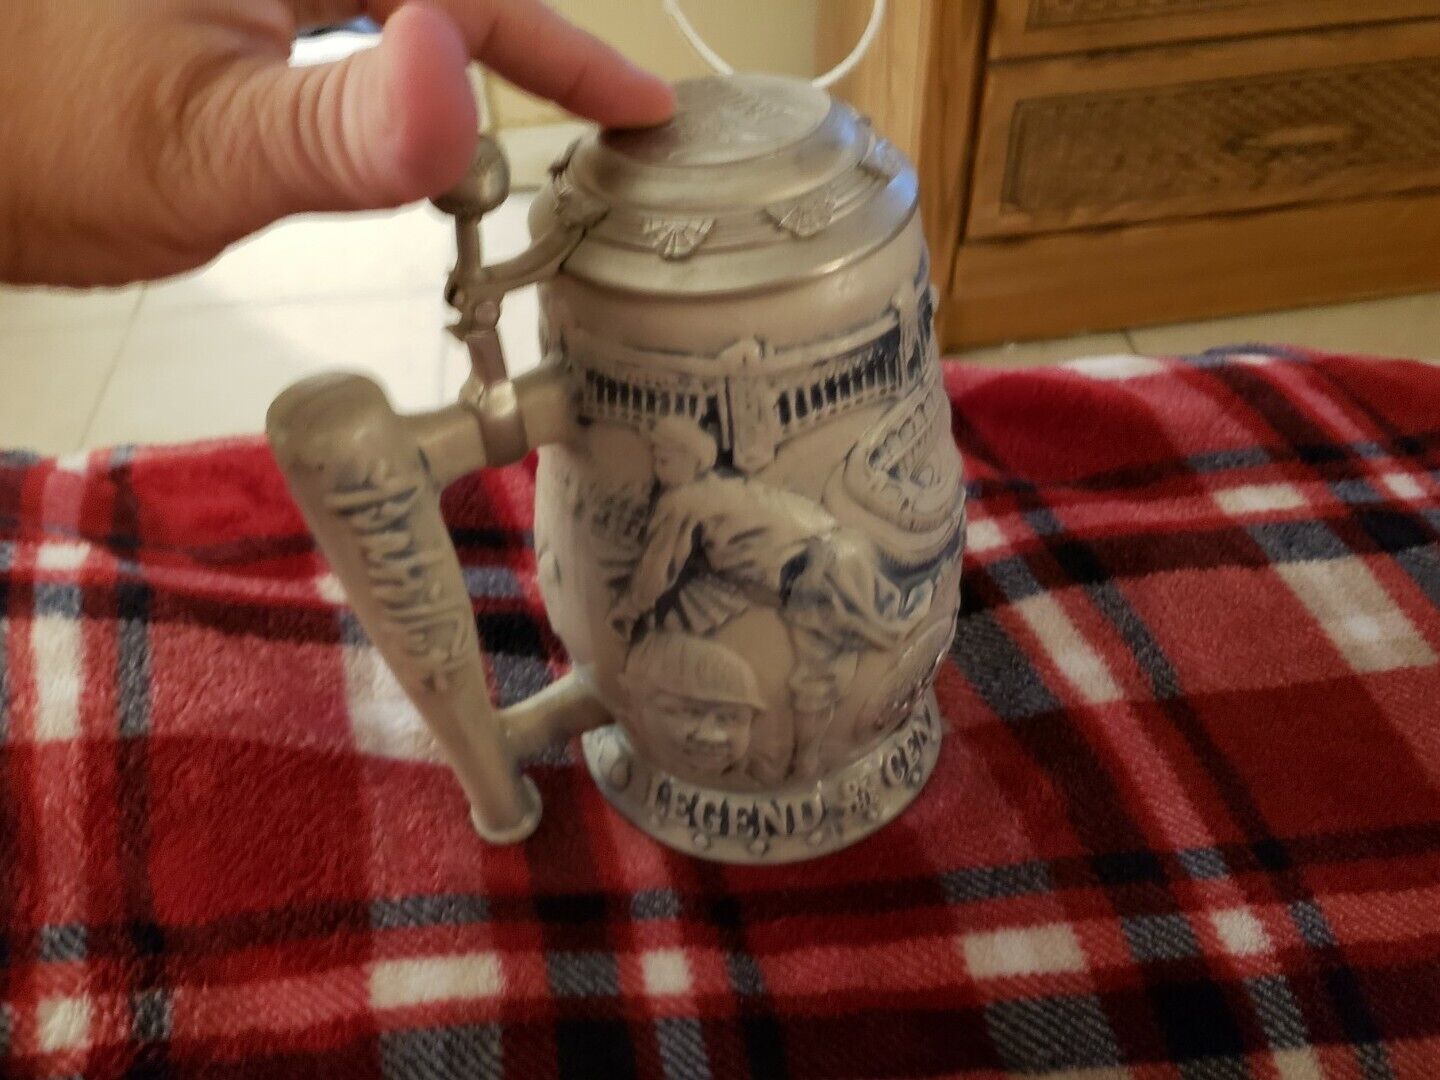 Legend of the Century collectors Stein featuring Babe Ruth